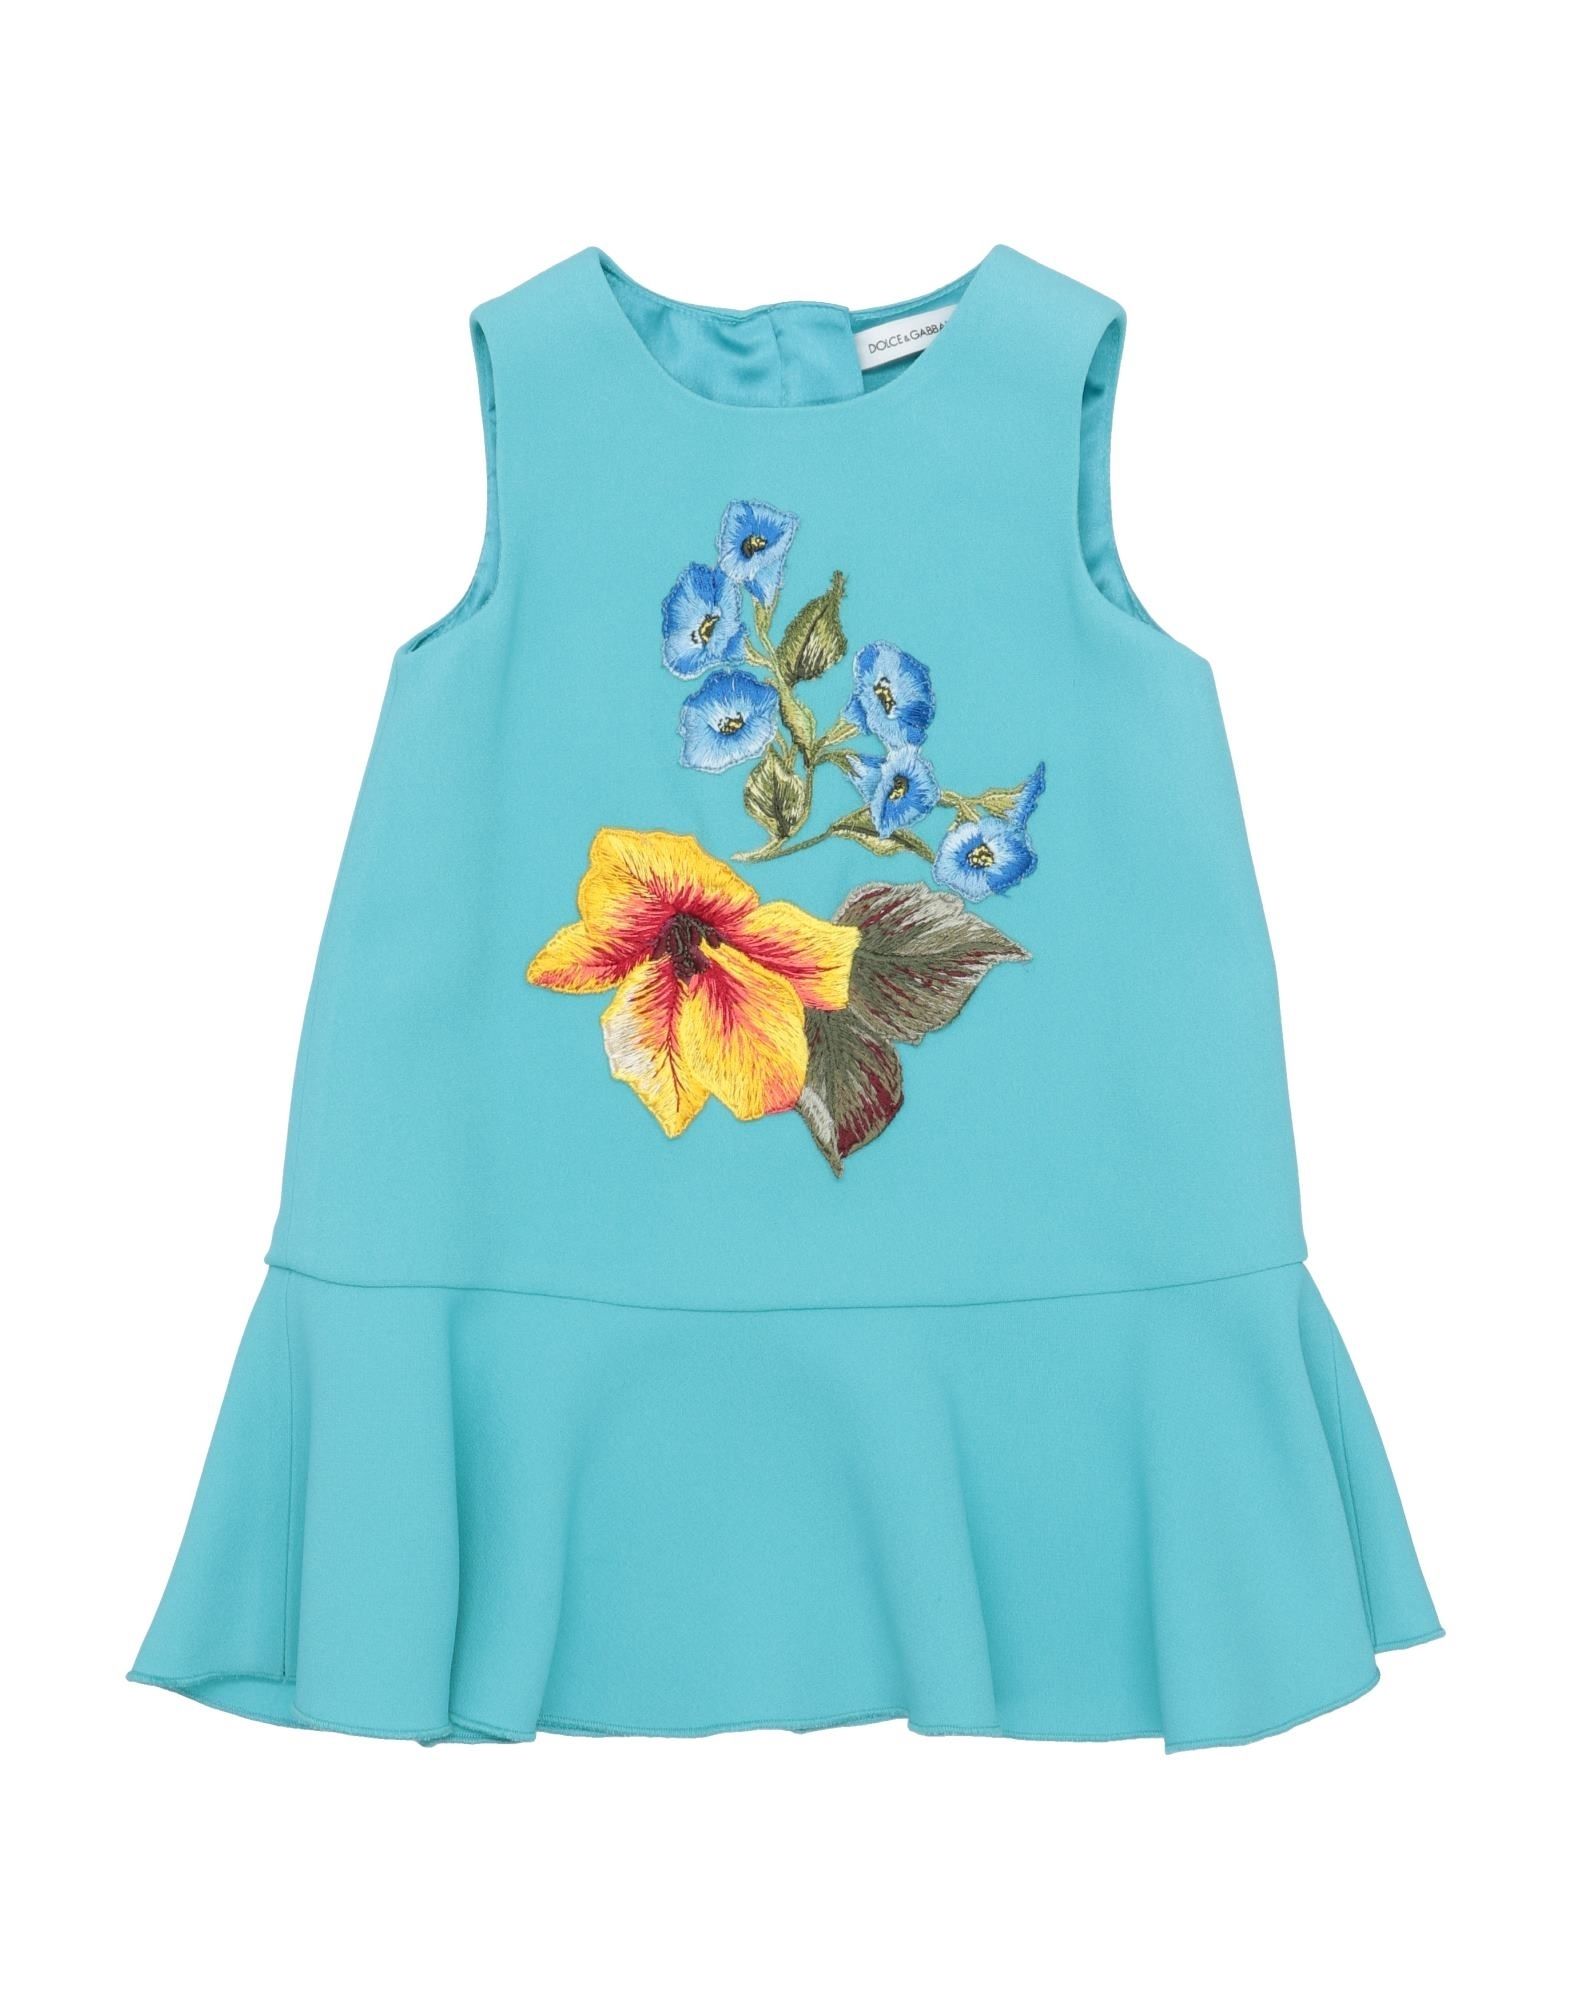 Dolce & Gabbana Kids' Dresses In Turquoise